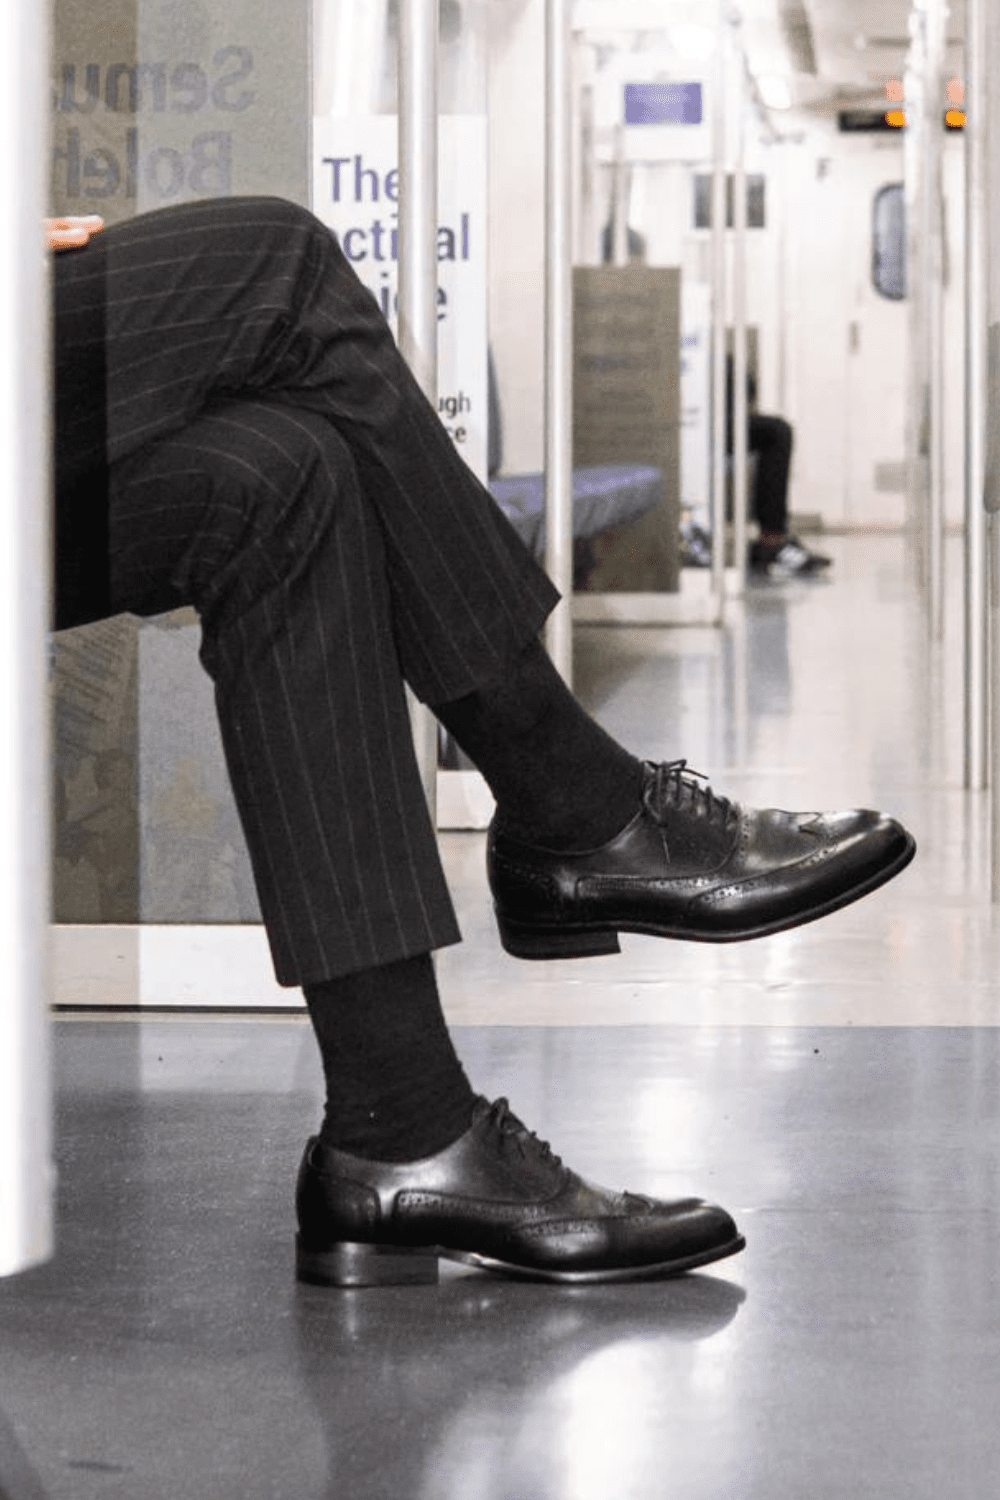 smart shoes with pinstripe suit